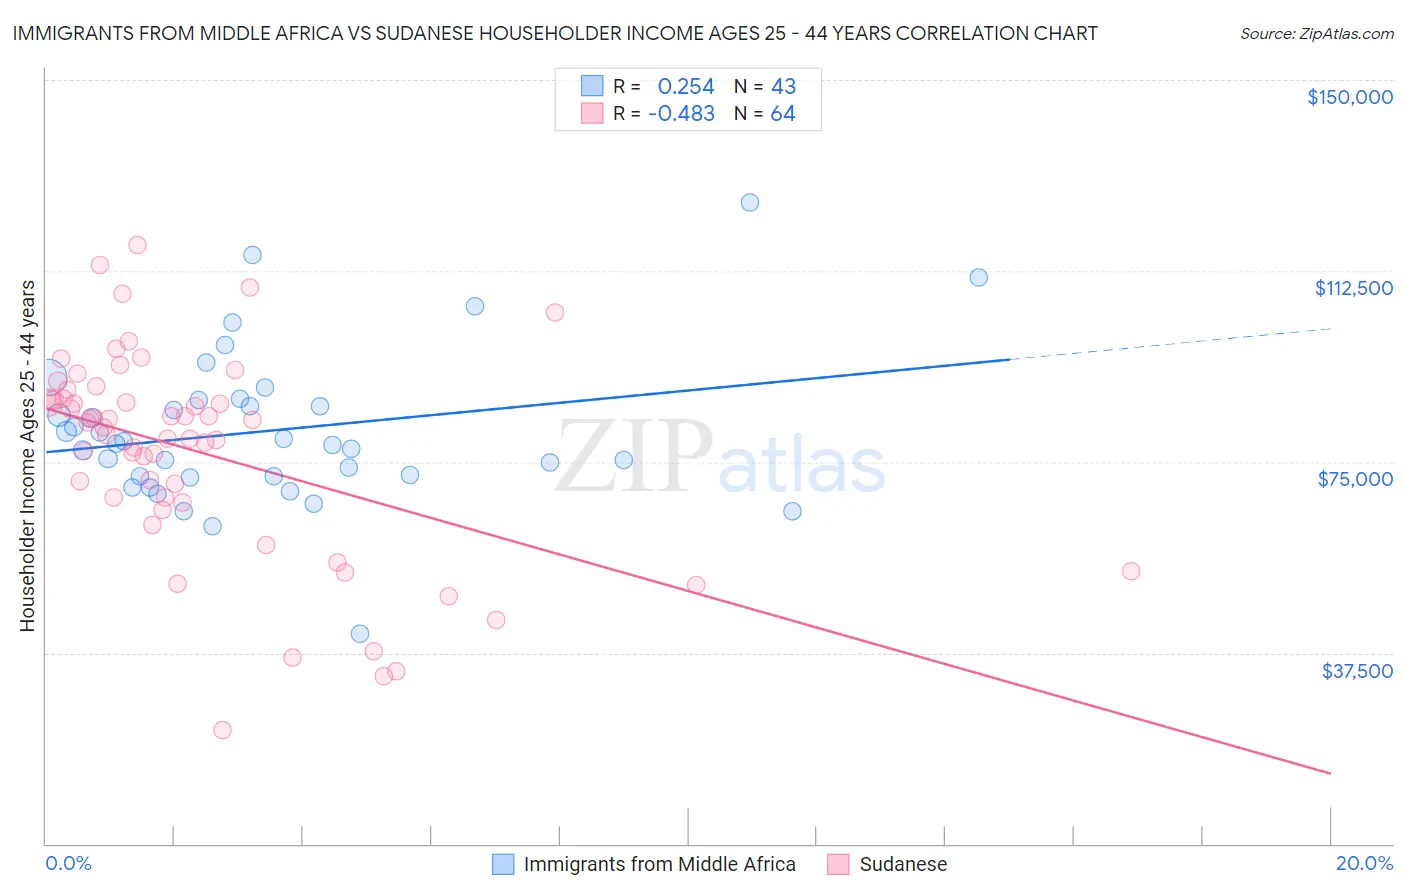 Immigrants from Middle Africa vs Sudanese Householder Income Ages 25 - 44 years